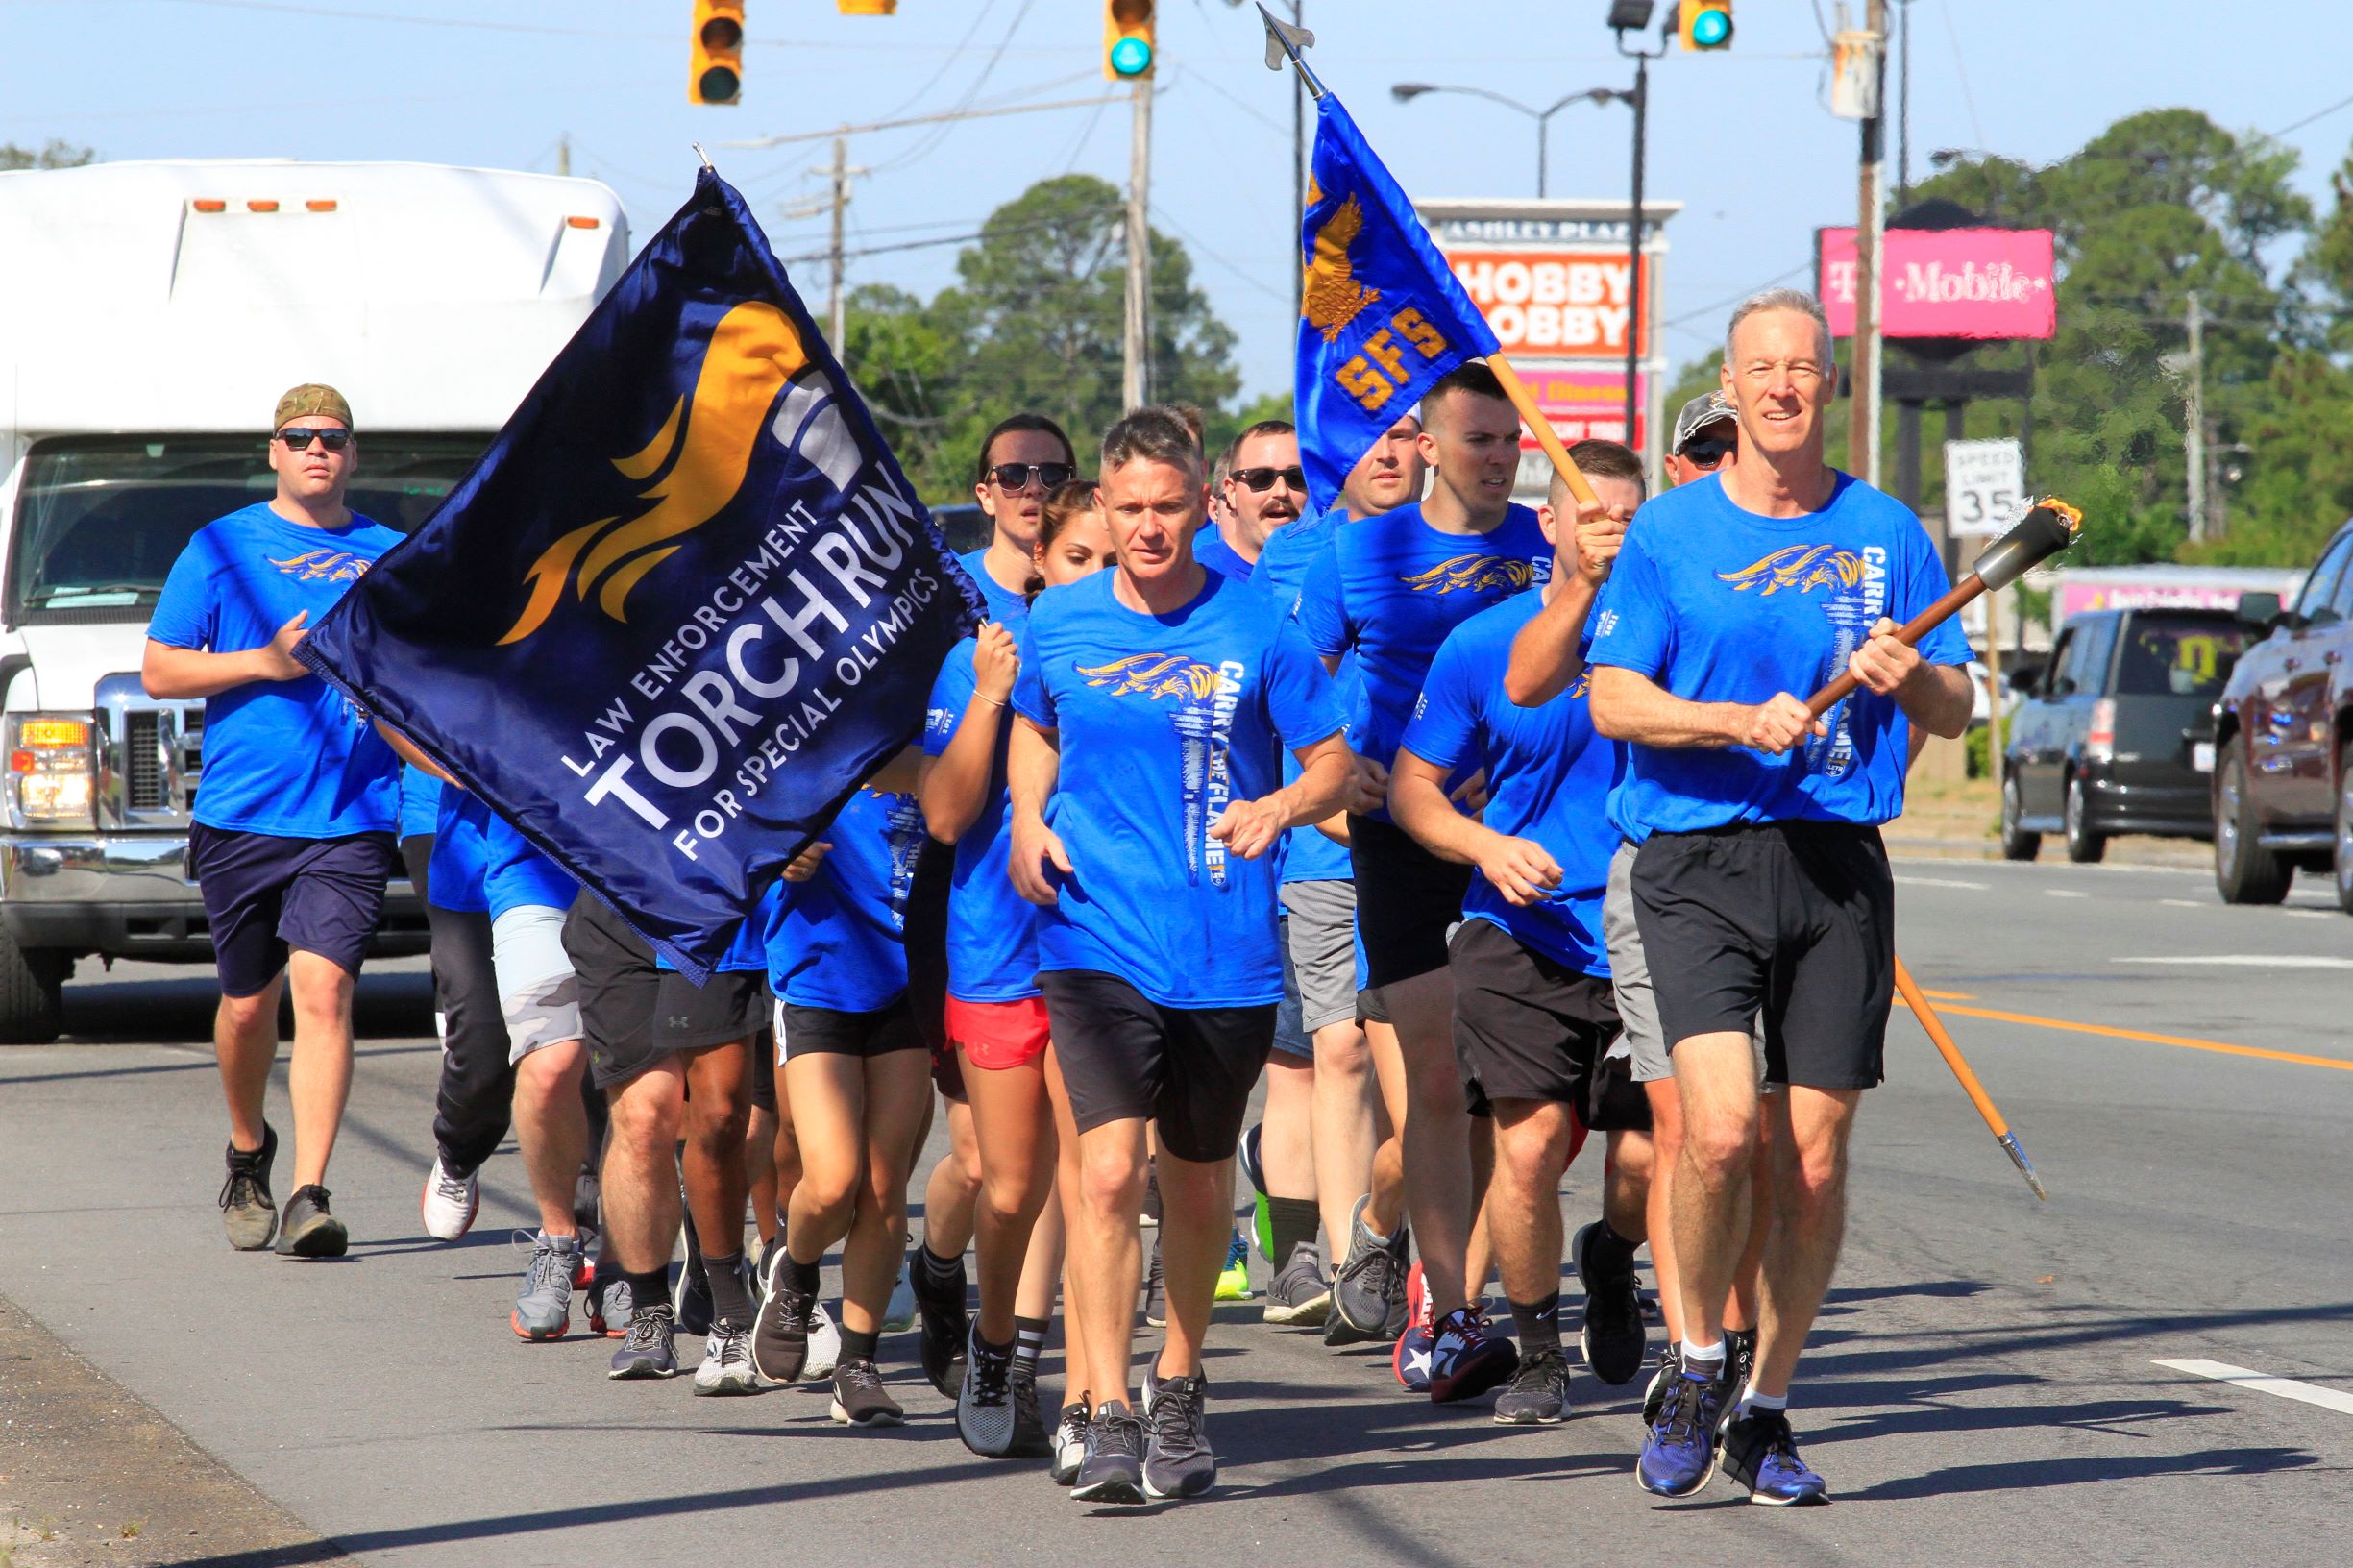 GPD, SJAFB Carry Torch For Special Olympics (PHOTO GALLERY)